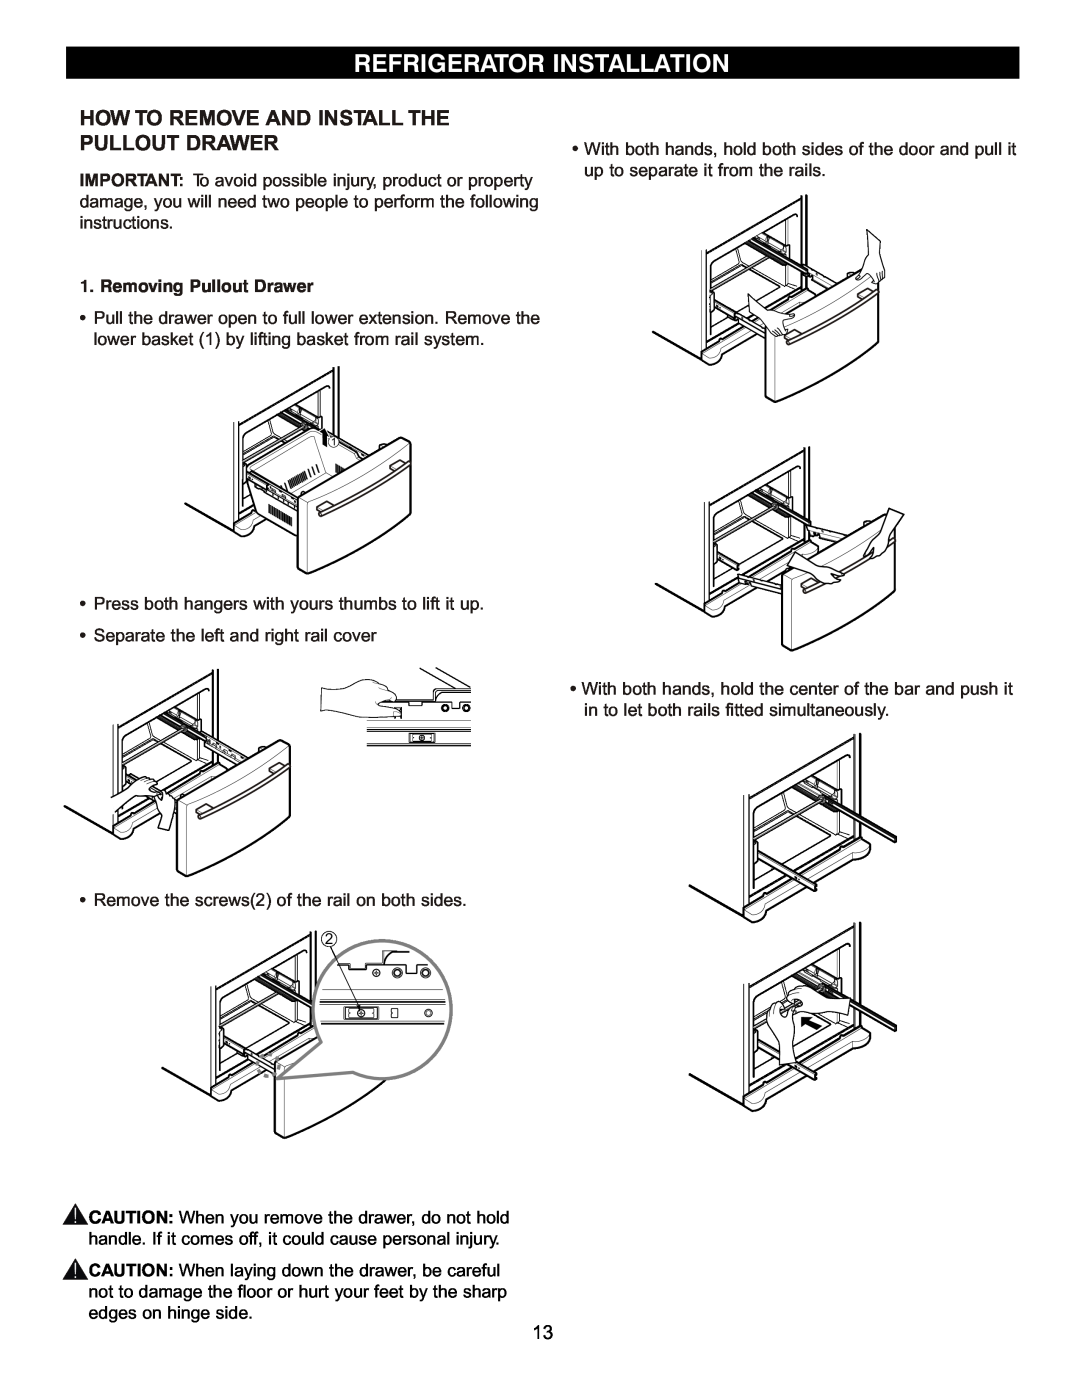 LG Electronics LBN2251 How To Remove And Install The Pullout Drawer, Removing Pullout Drawer, Refrigerator Installation 